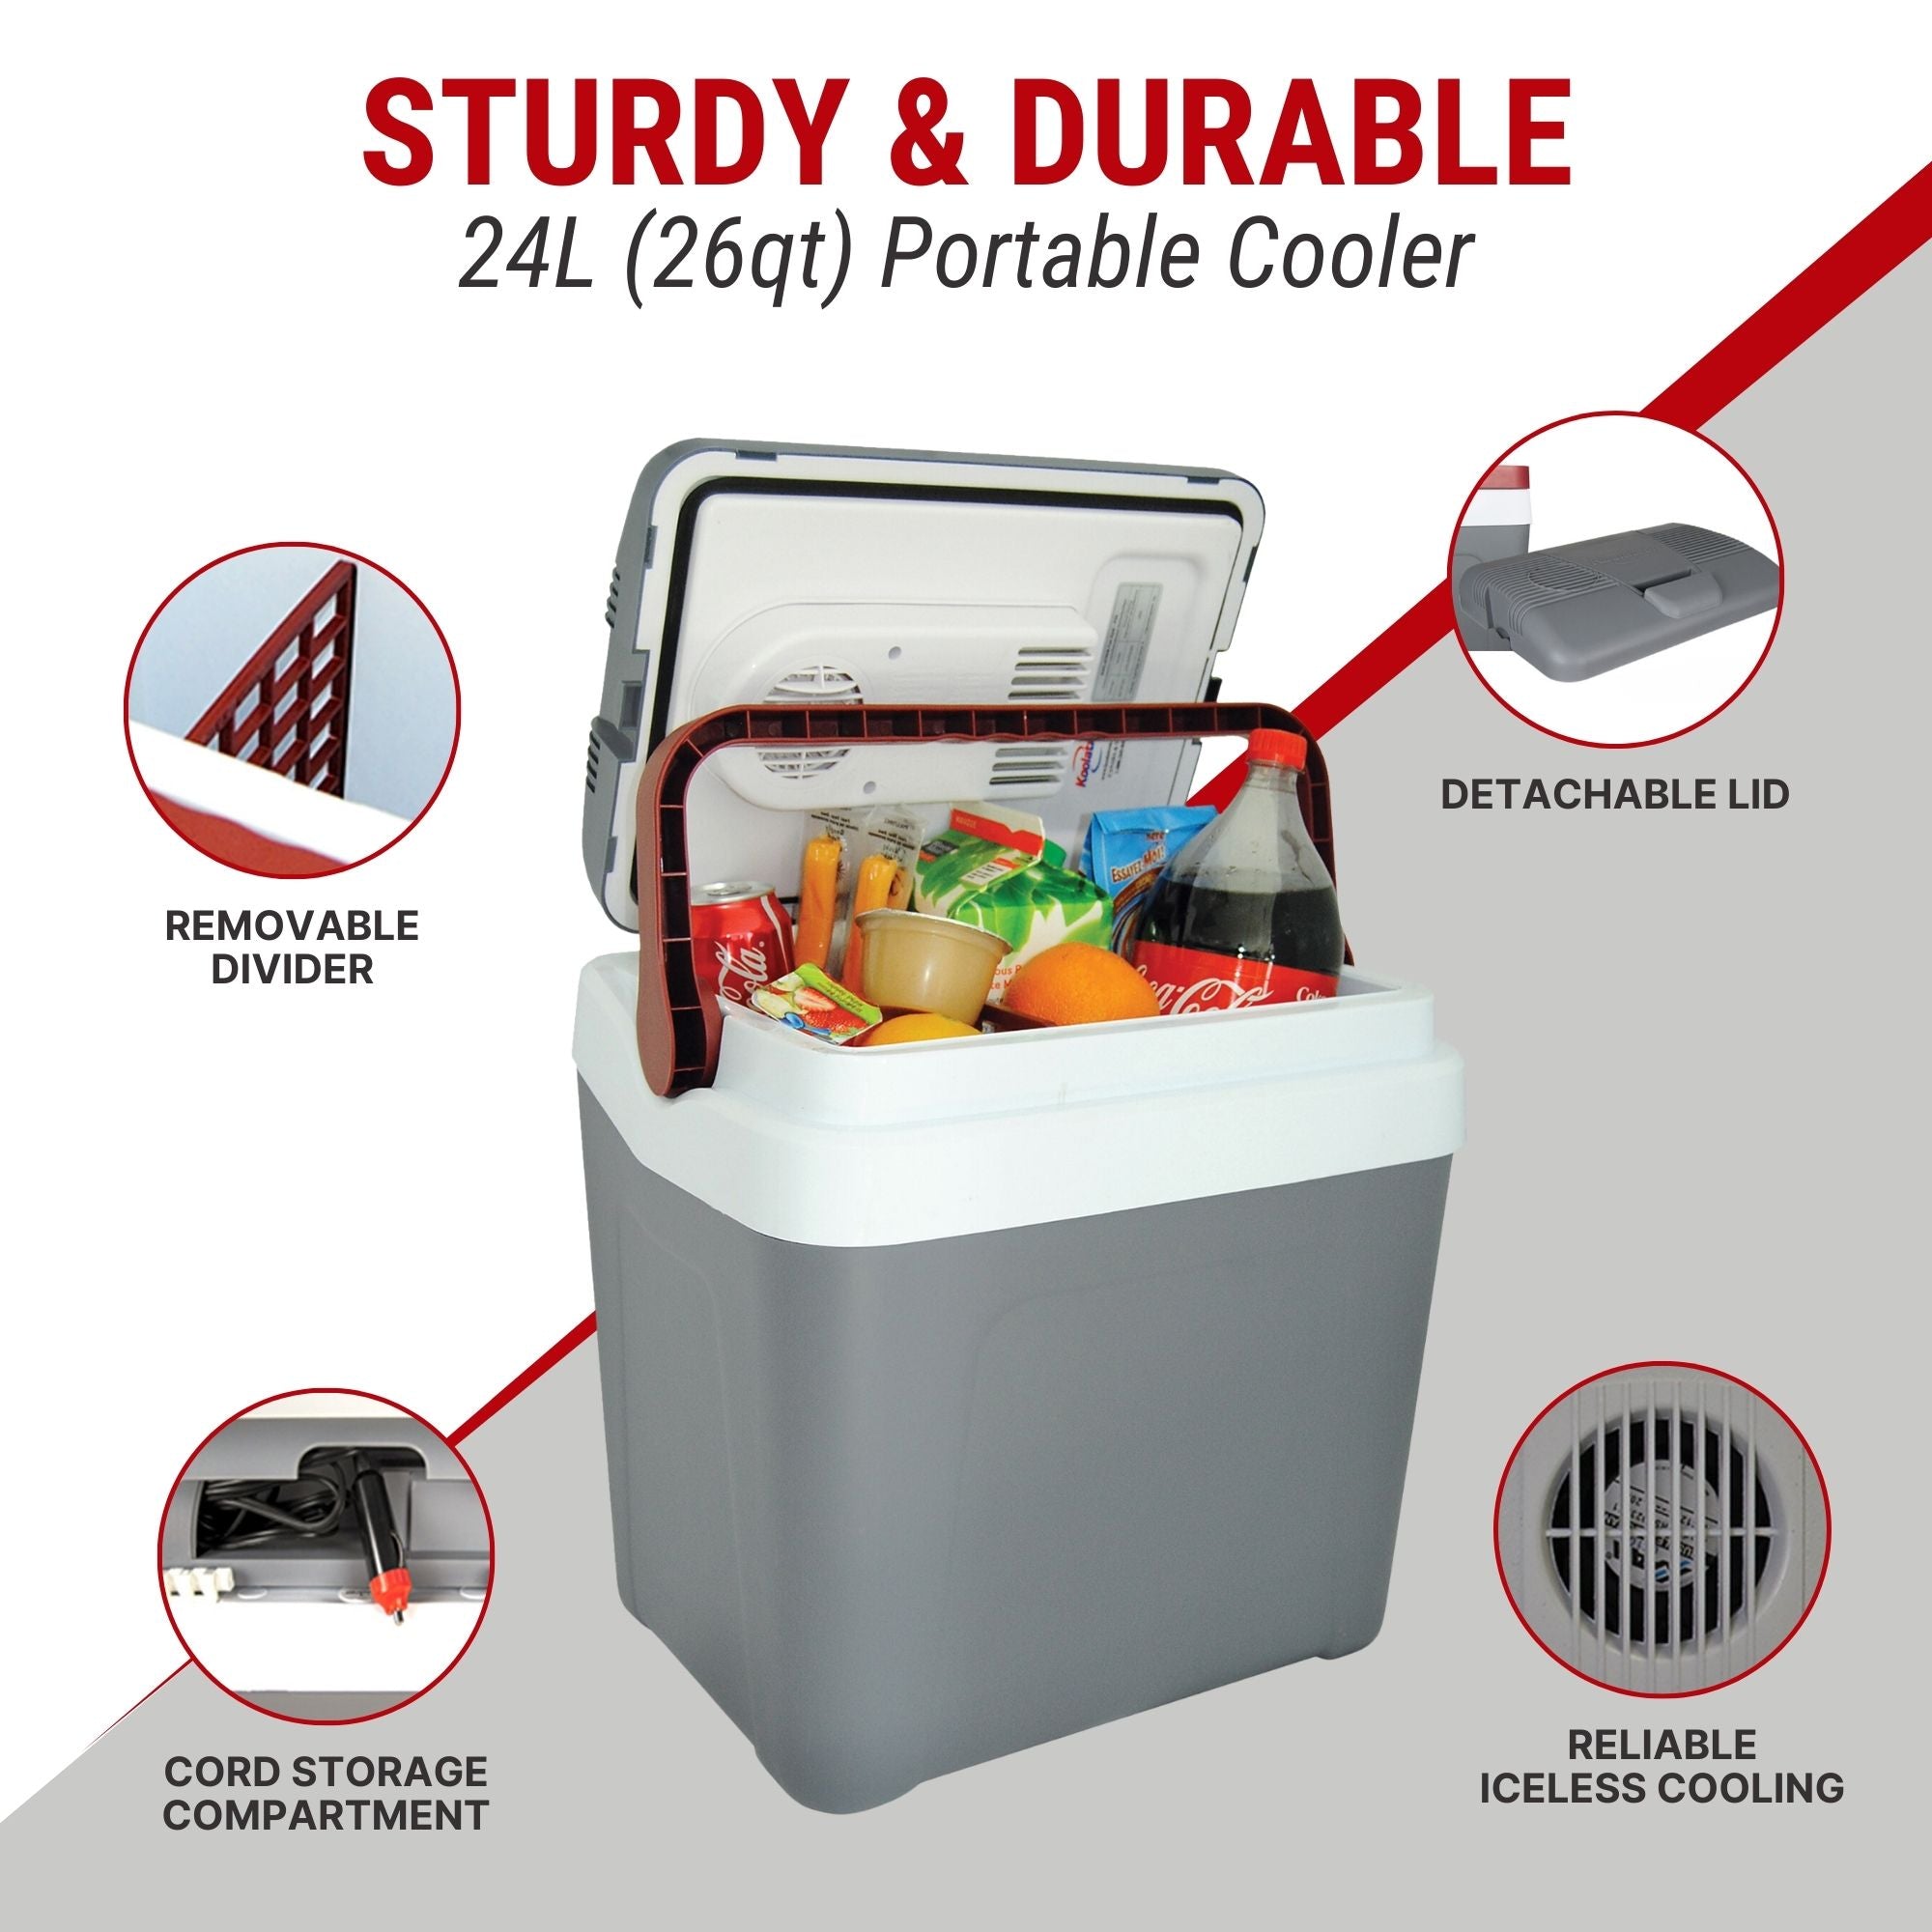 Koolatron 12V cooler open with food inside surrounded by closeup images of features, labeled: cord storage compartment; removable divider; detachable lid; reliable iceless cooling. Text above reads, "STURDY AND DURABLE 24L (26 qt) portable cooler"